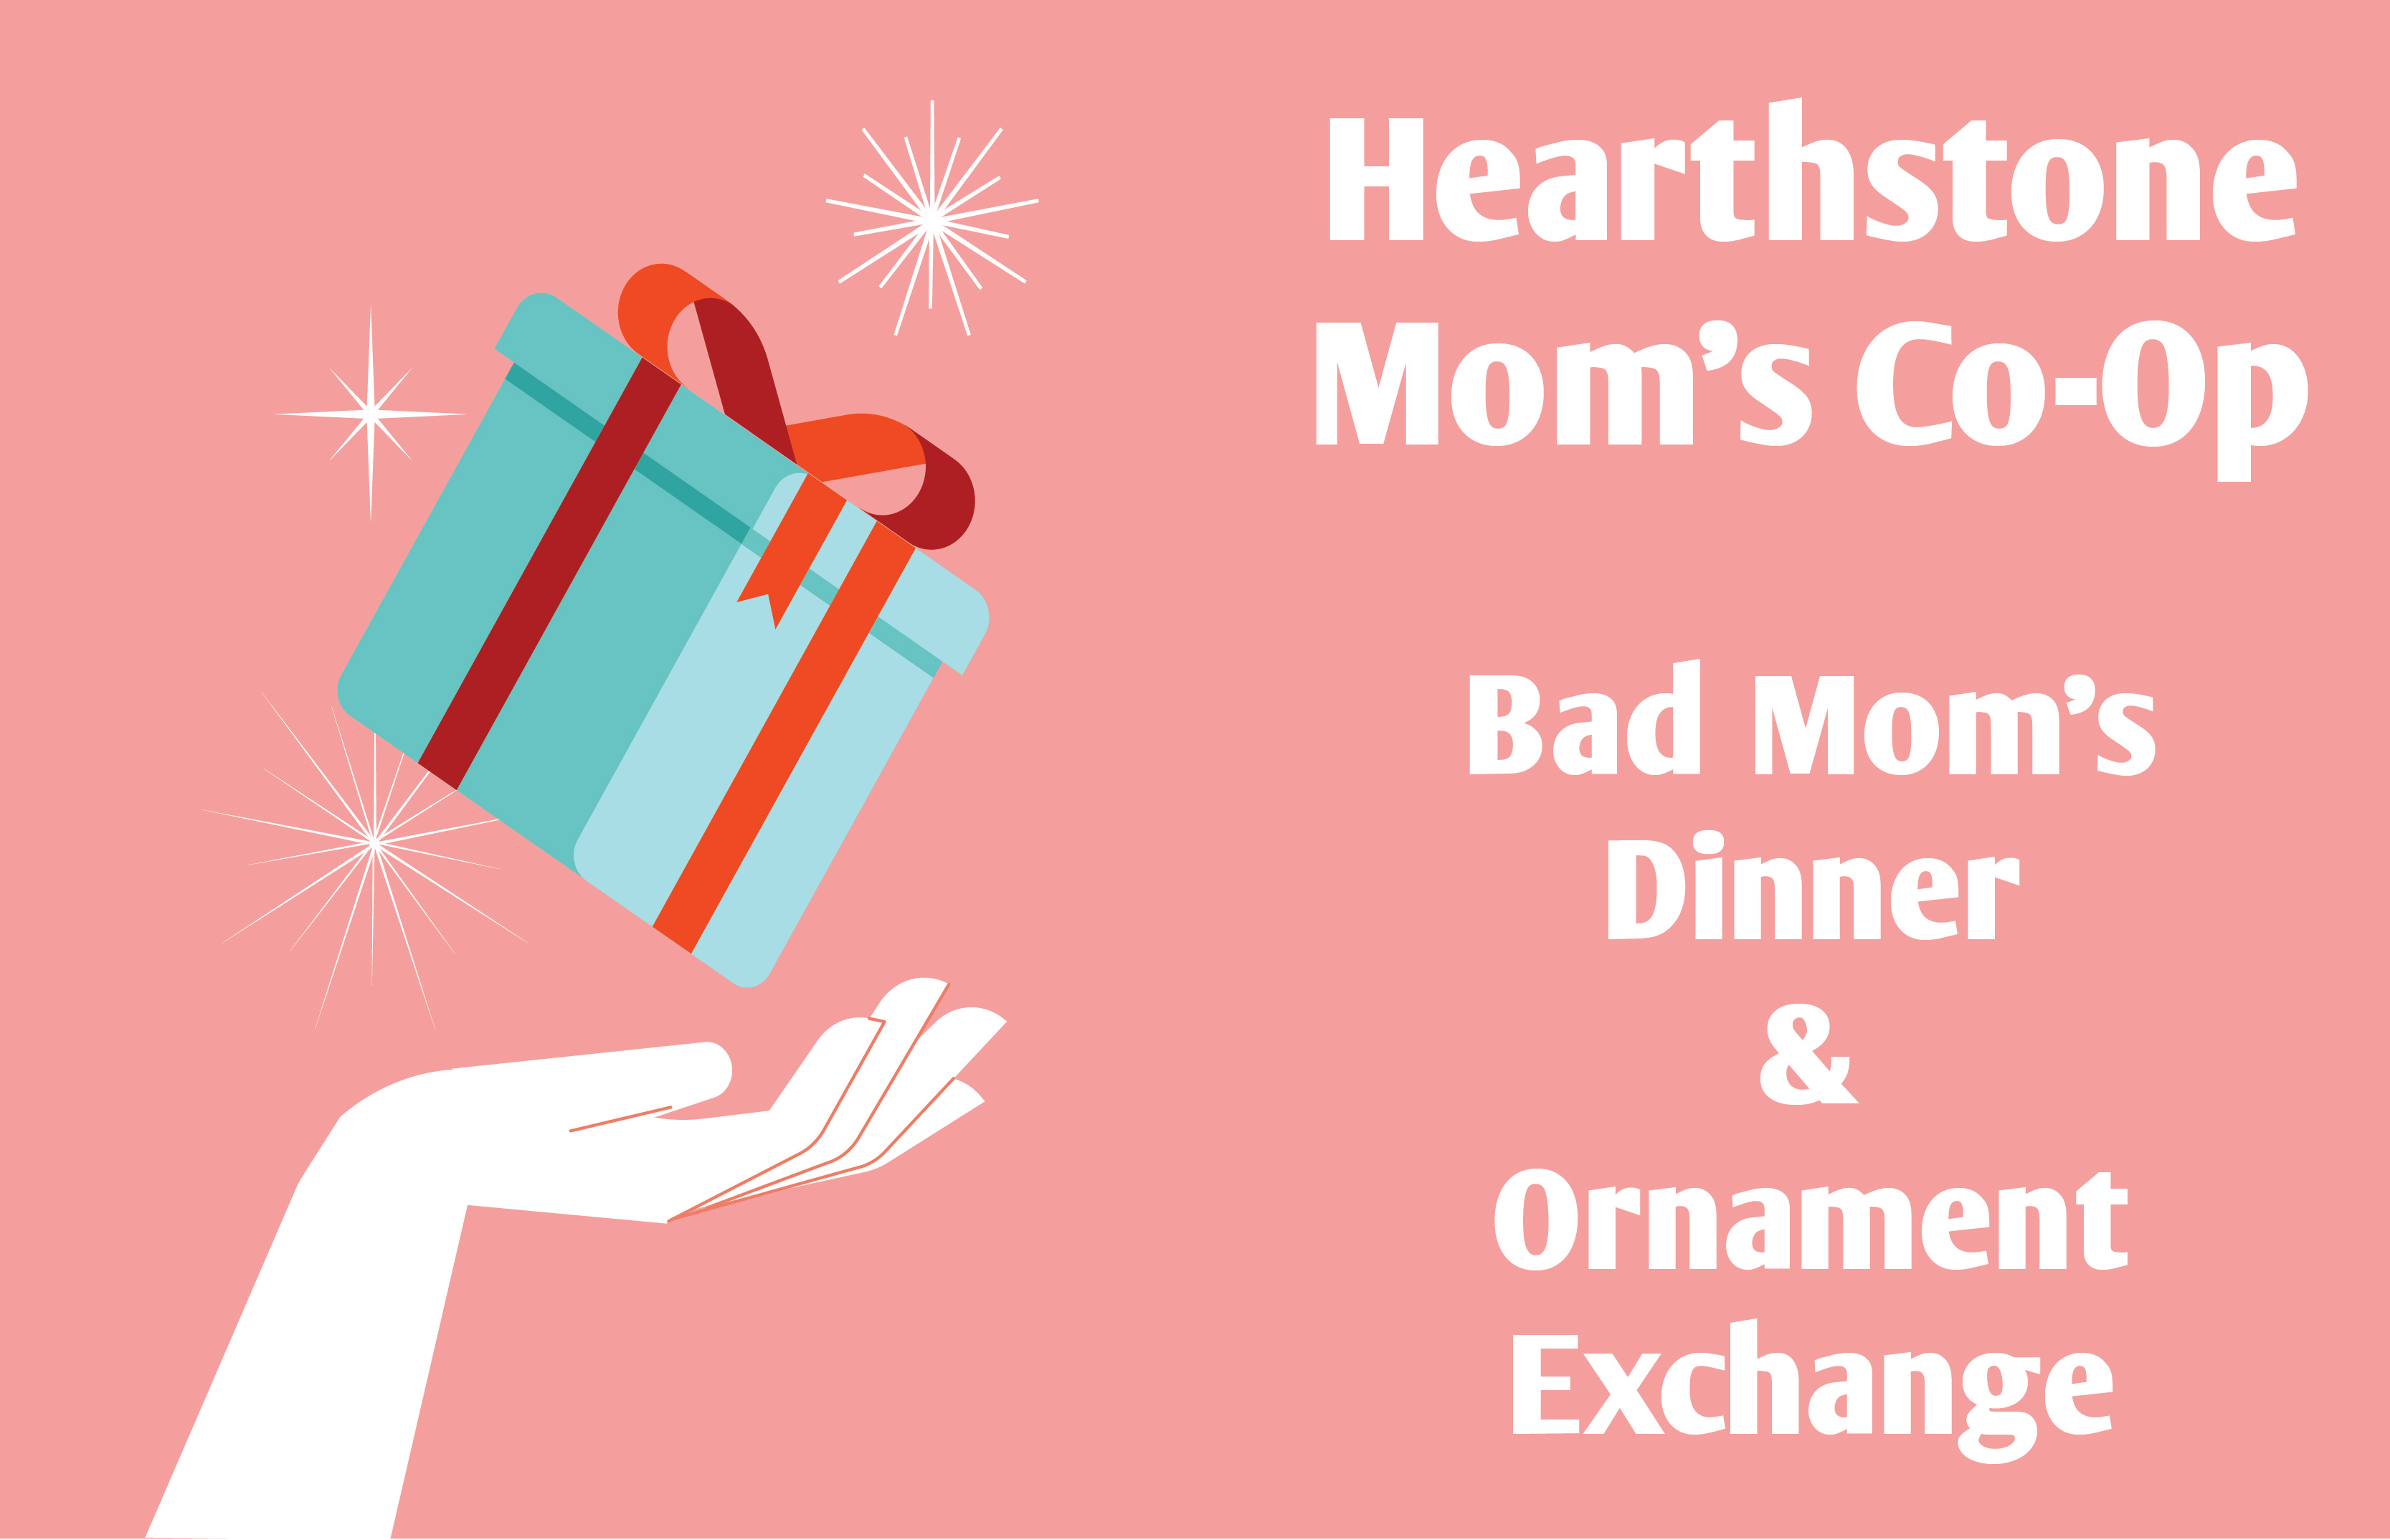 Hearthstone Mom's Co-Op to Host Bad Mom's Dinner and Ornament Exchange